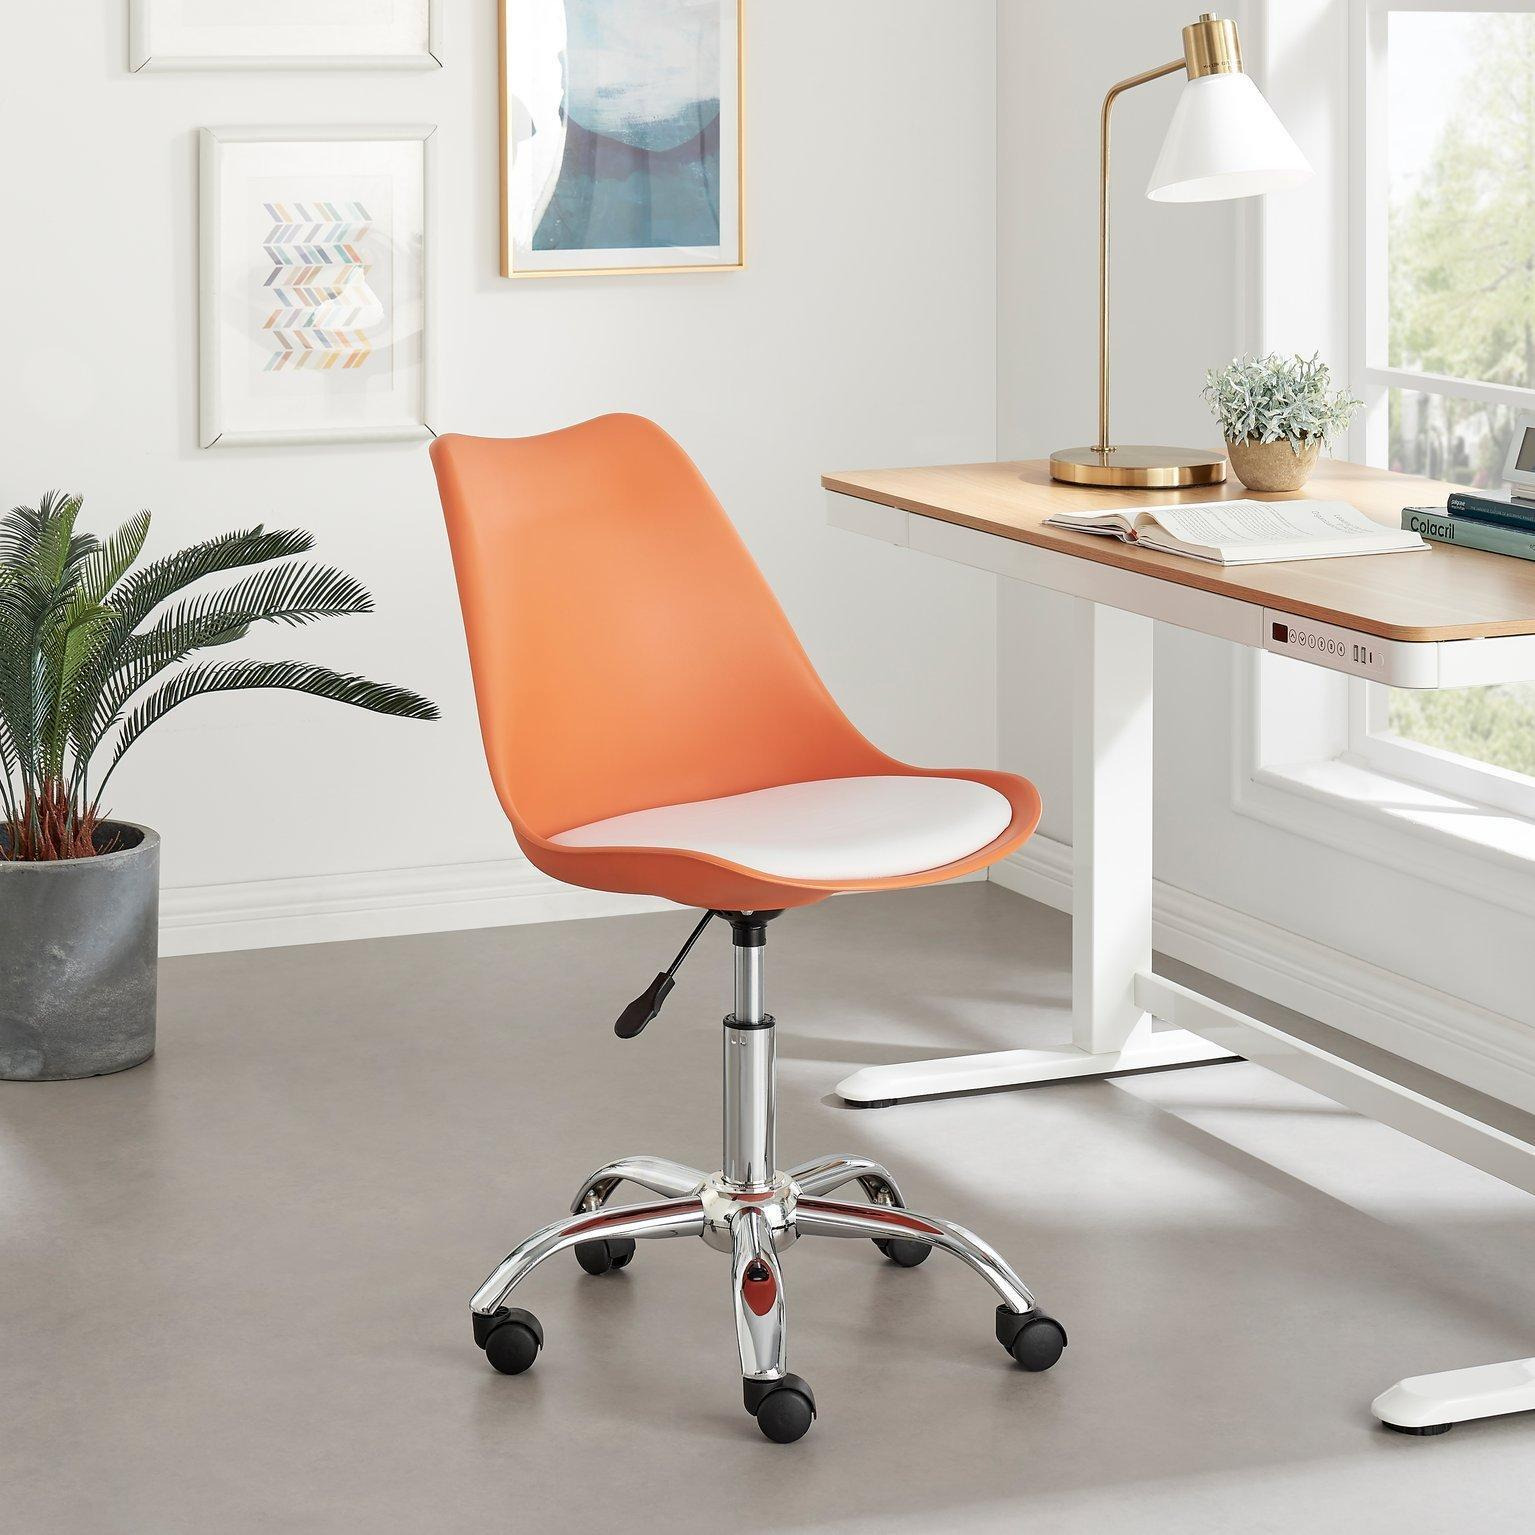 Oslo Scandi Inspired Office Chair With A Comfortable Faux Leather Seat Cushion - image 1